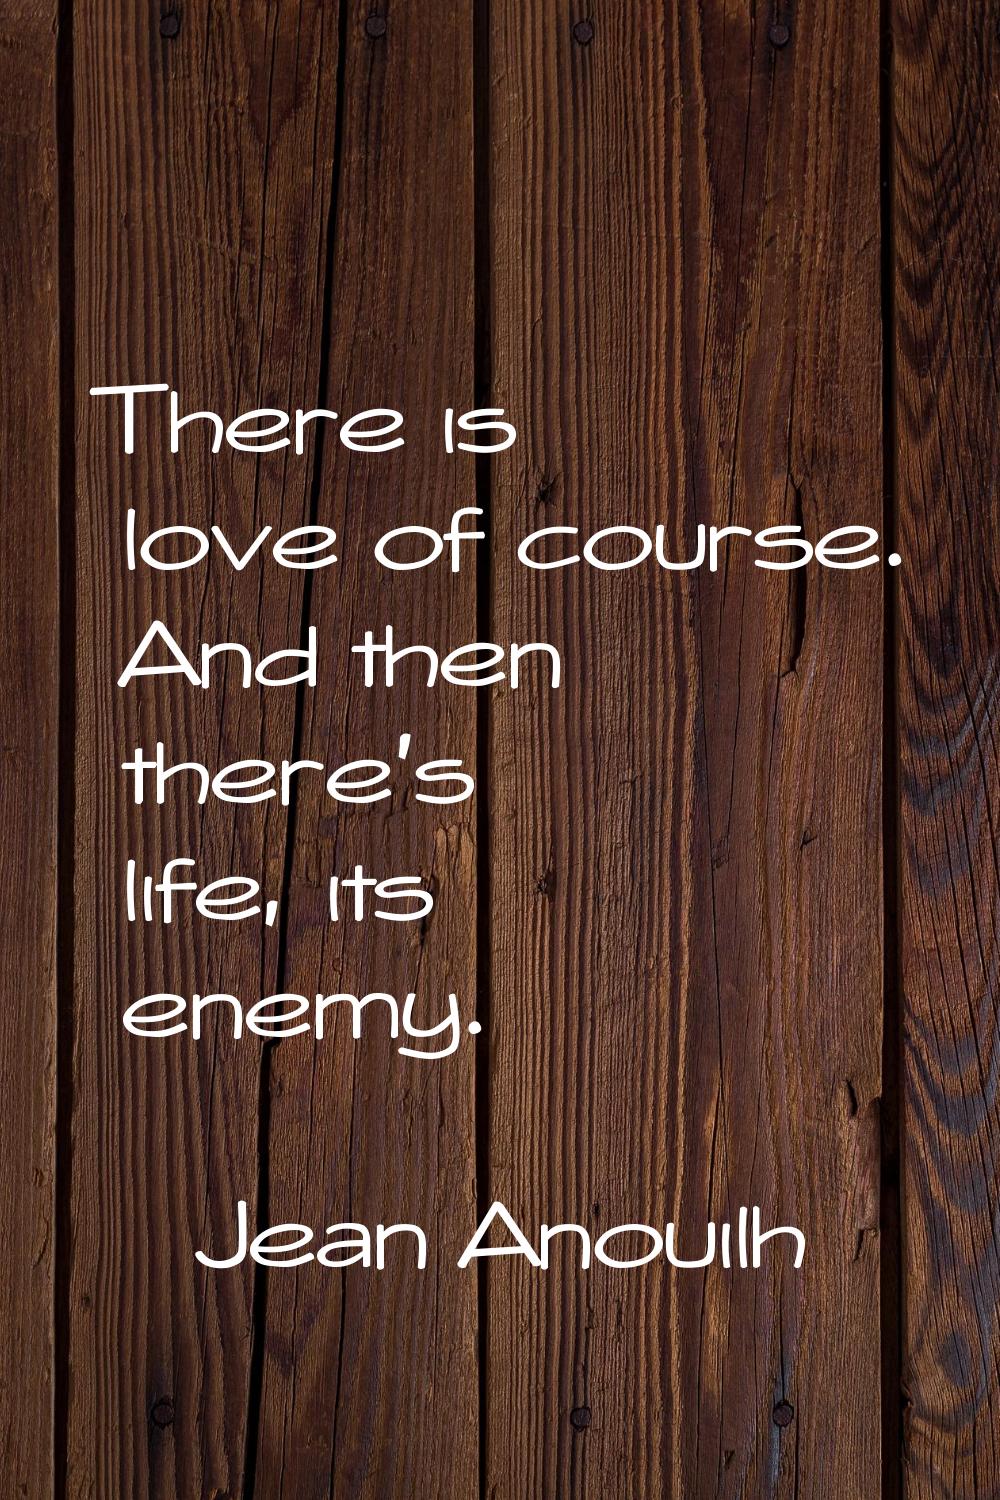 There is love of course. And then there's life, its enemy.